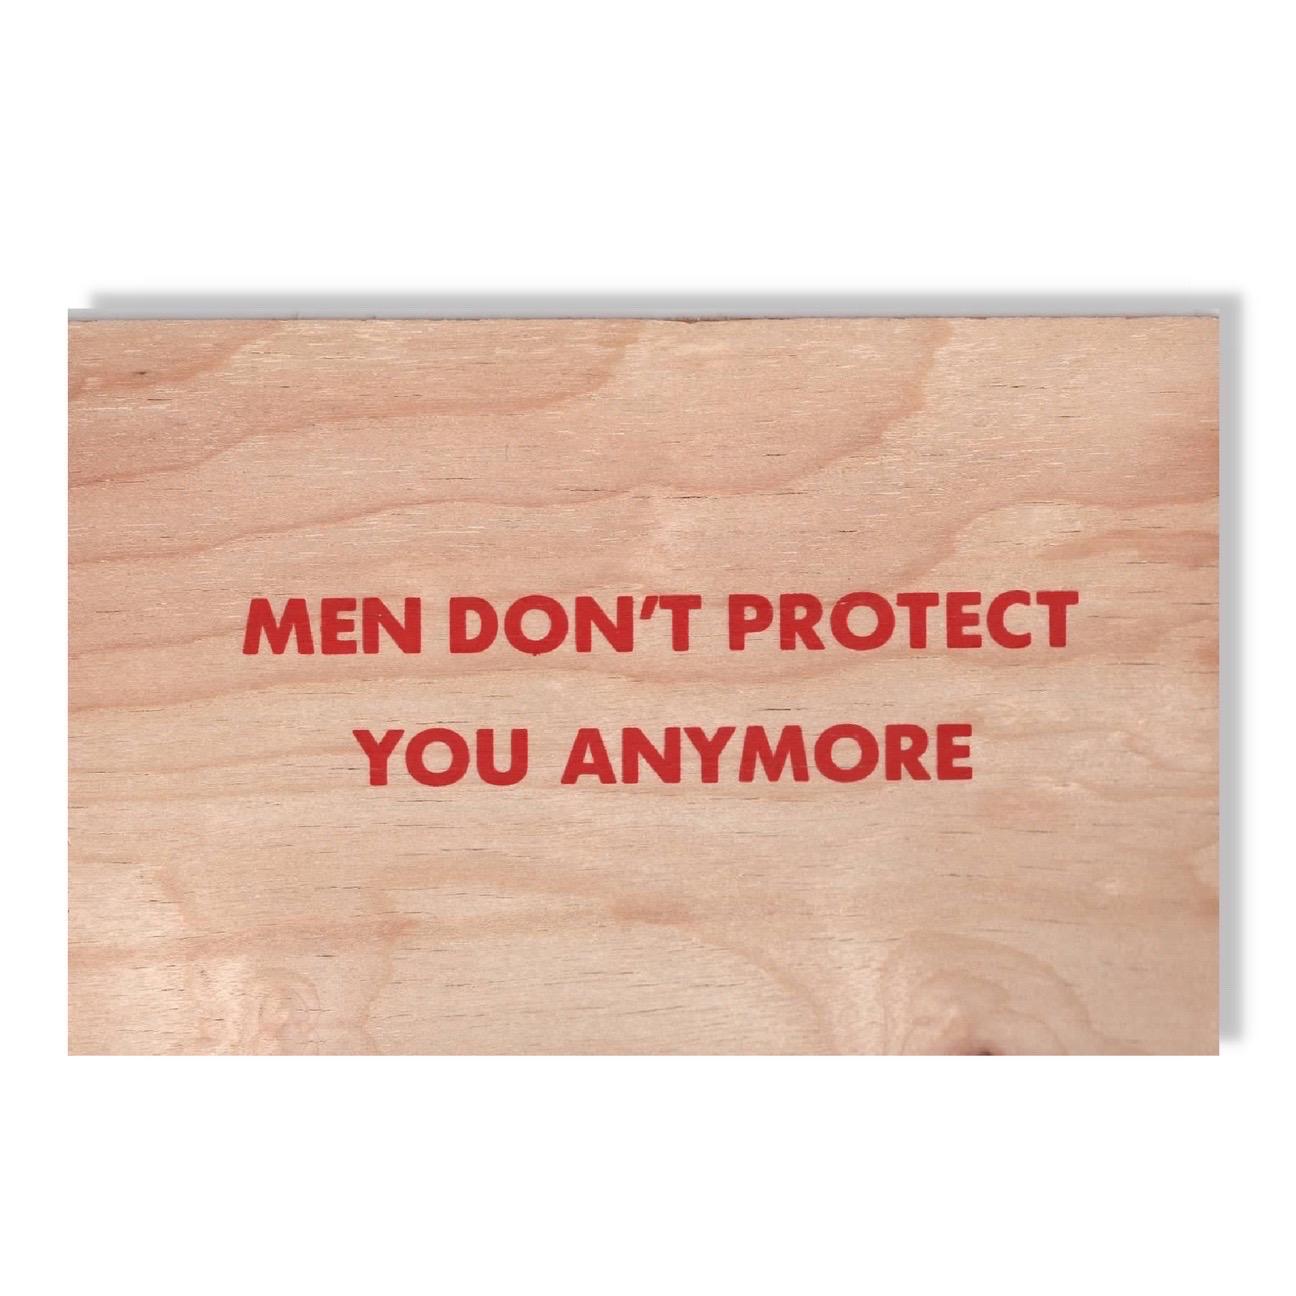 Jenny Holzer, Truism: Men Don't Protect You Anymore

Screenprint on Cherry wood 

10 x 15 cm 

Limited Edition of an unknown size
